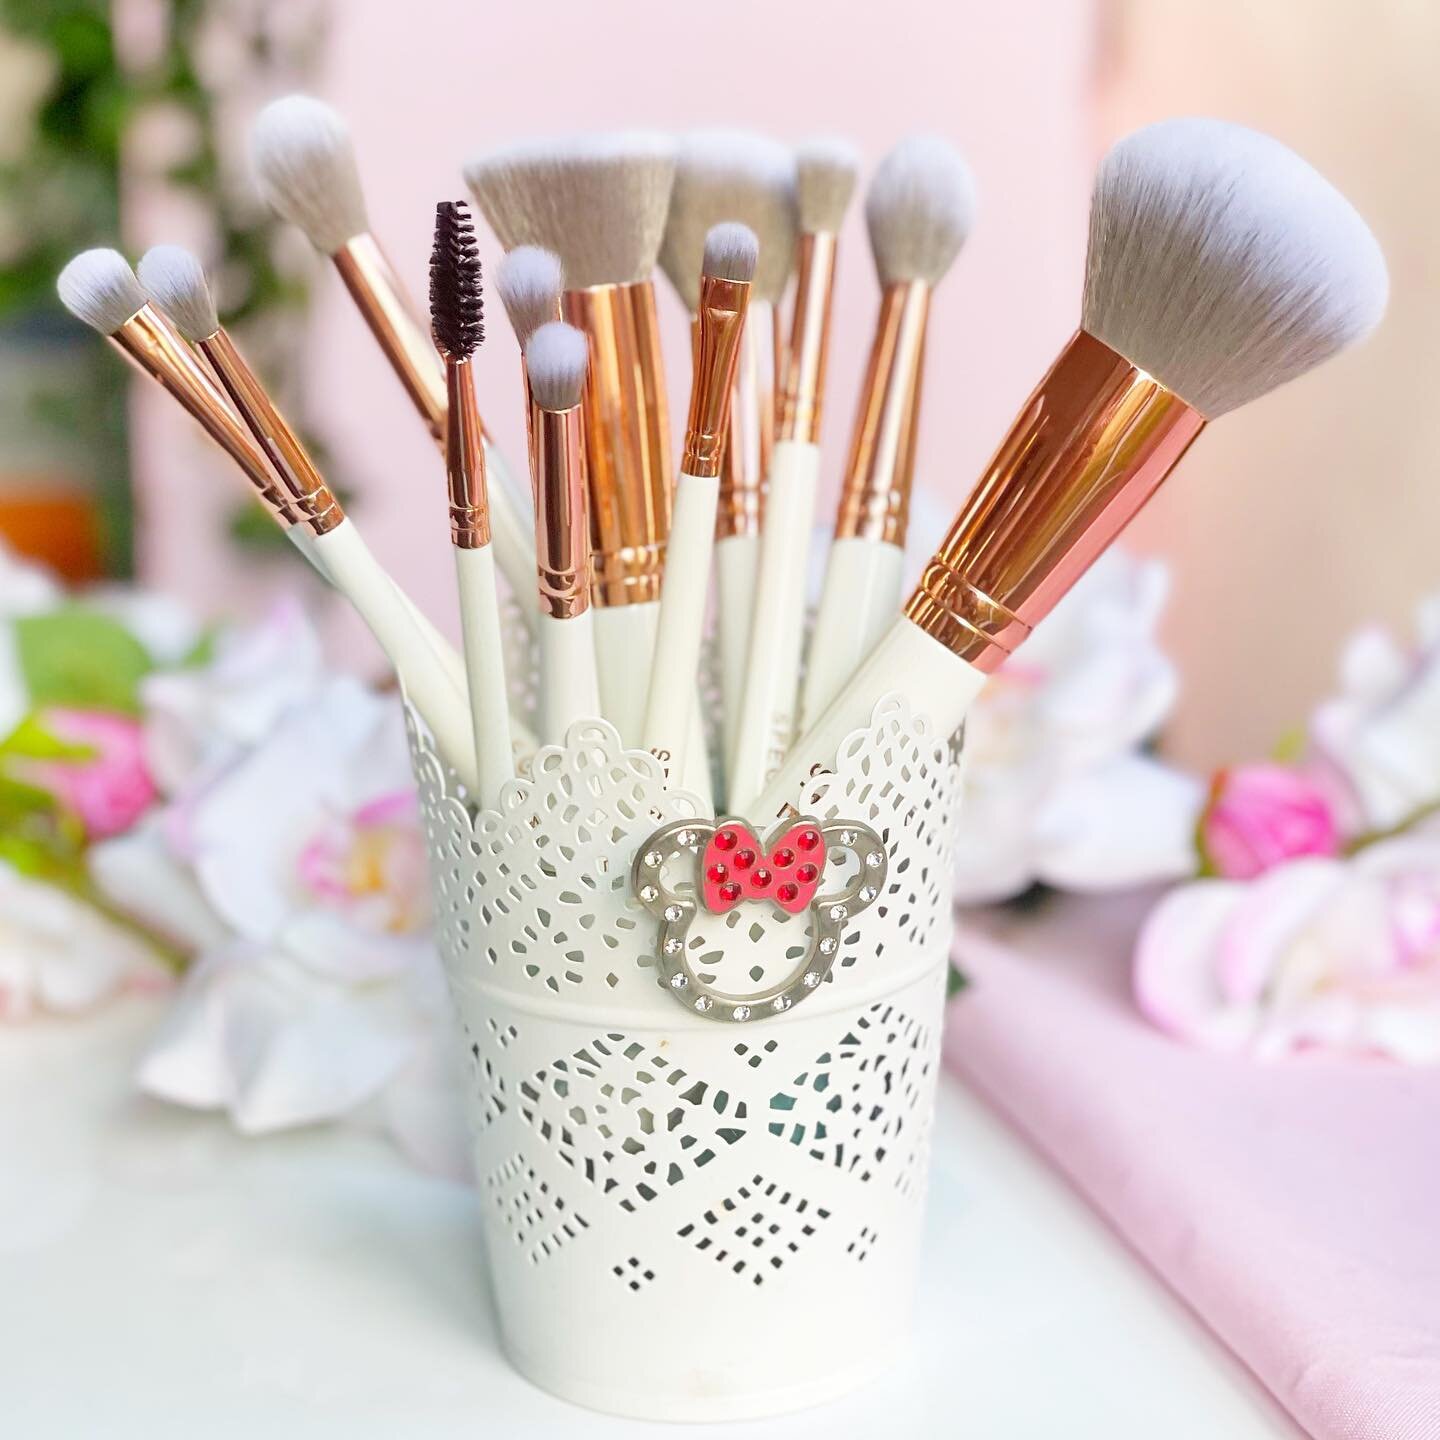 B r u s h e s ✨ 

Here&rsquo;s your reminder to wash your makeup brushes!! Be honest, when was the last time you washed your brushes?  My kit ones are of course cleaned non stop but my own &hellip; well I&rsquo;m also fussy about those too!  My own b